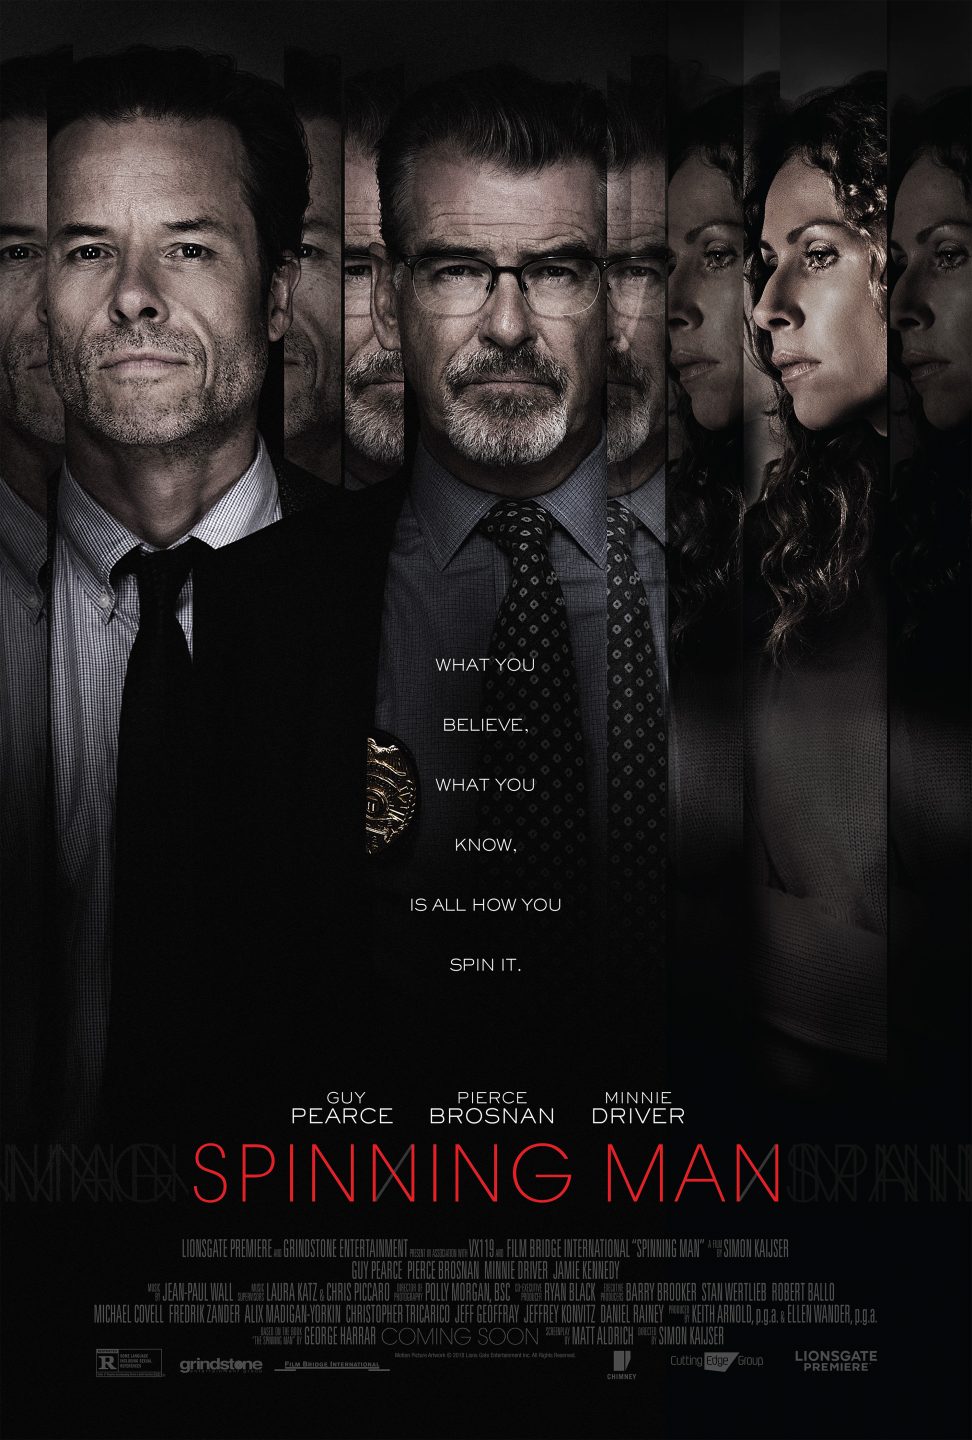 Spinning Man poster (Lionsgate Premiere)